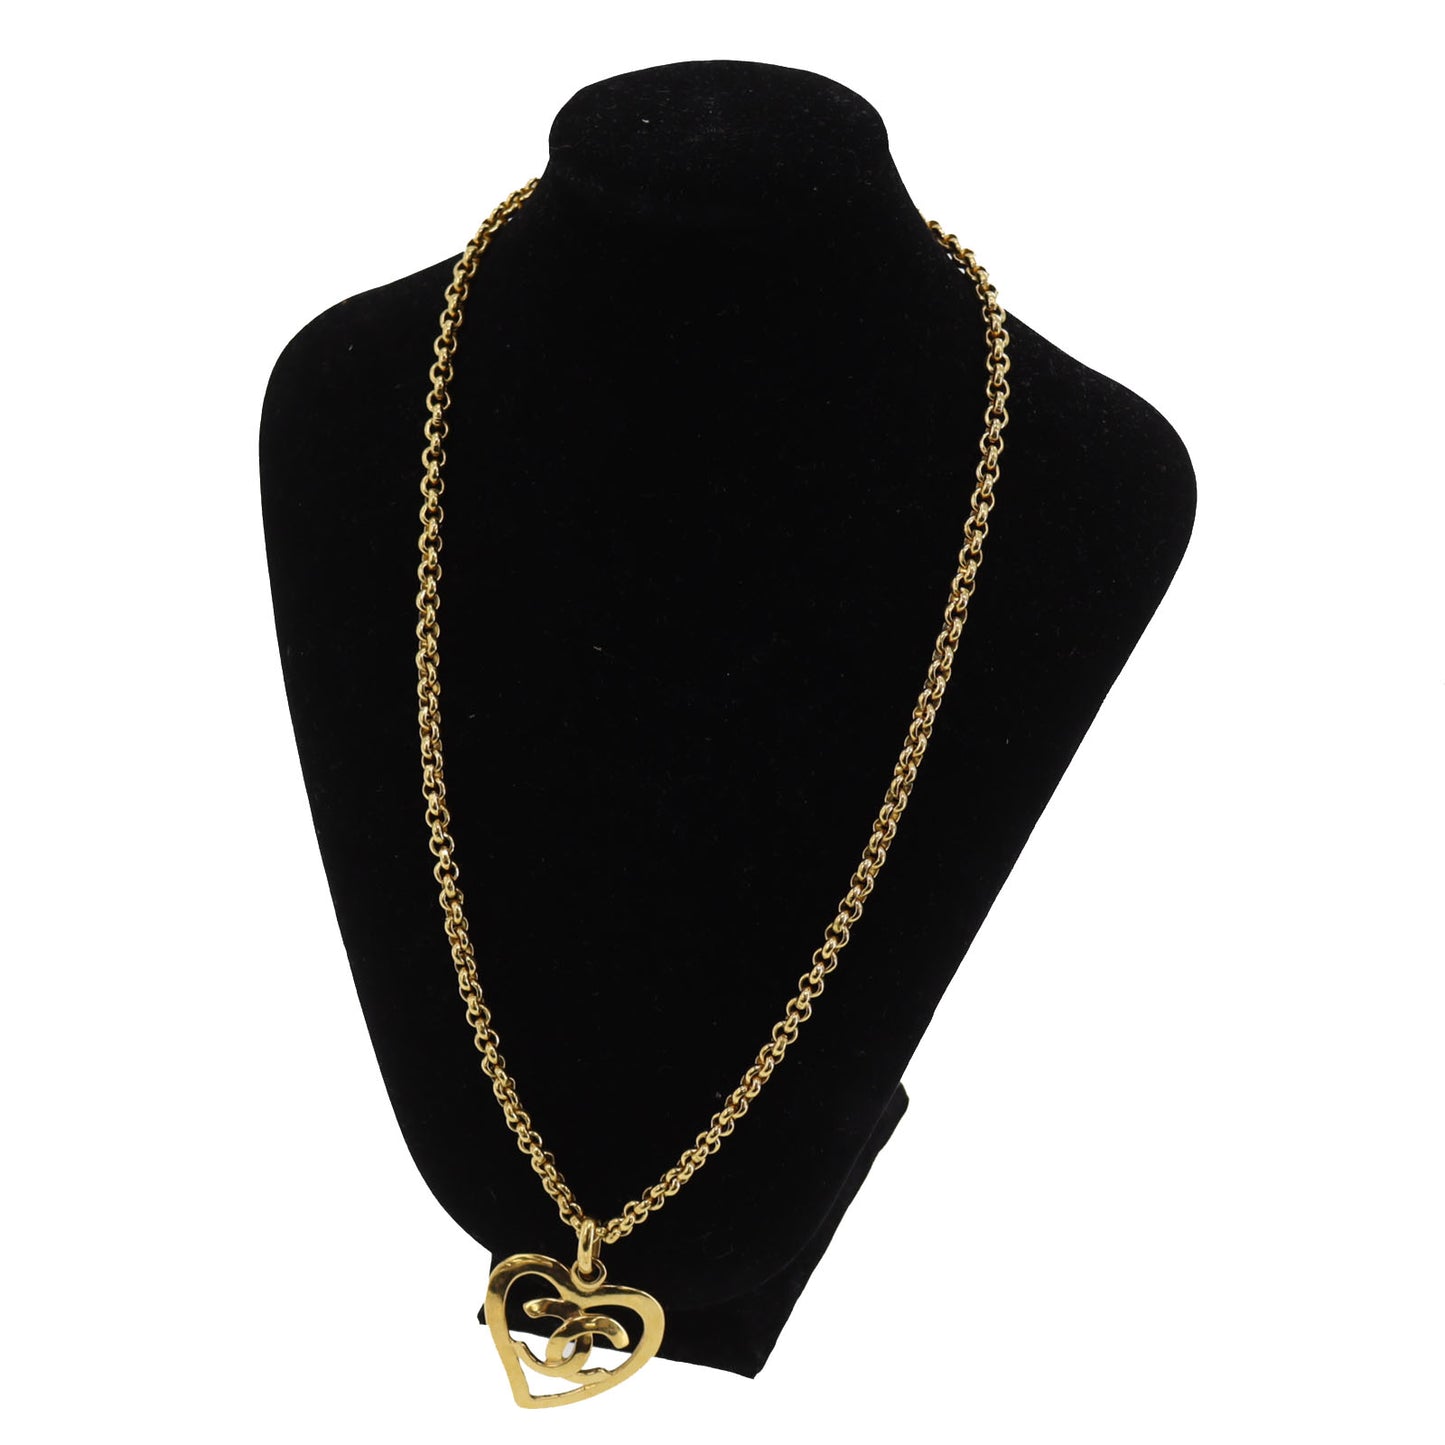 CHANEL CC Logos Heart Gold Plated Chain Necklace #CE734